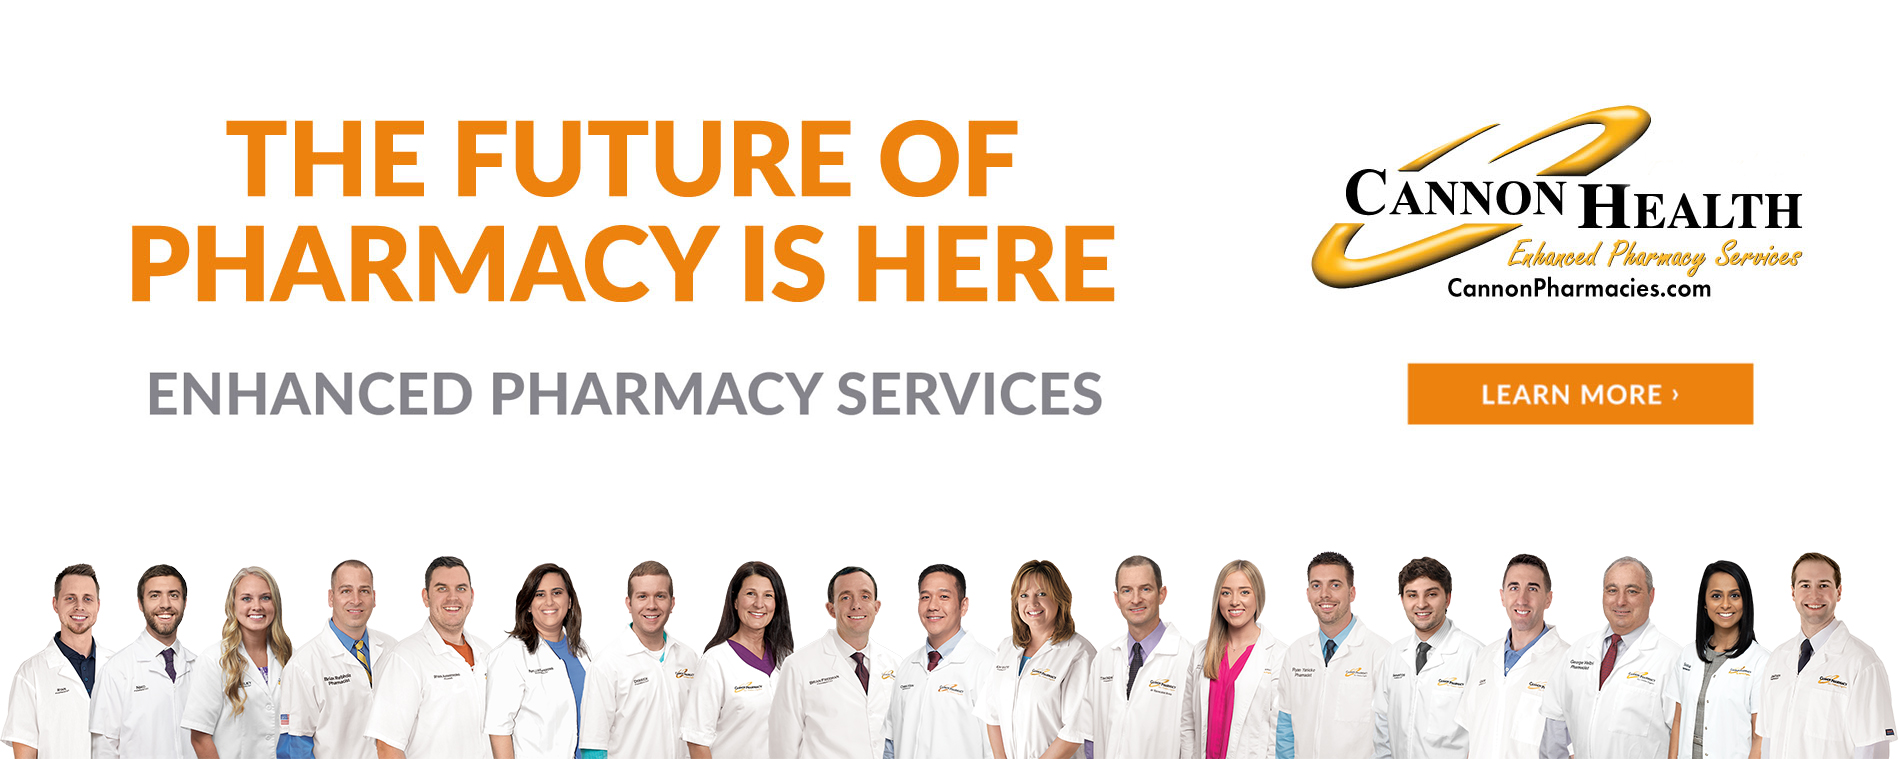 The future of pharmacy is here